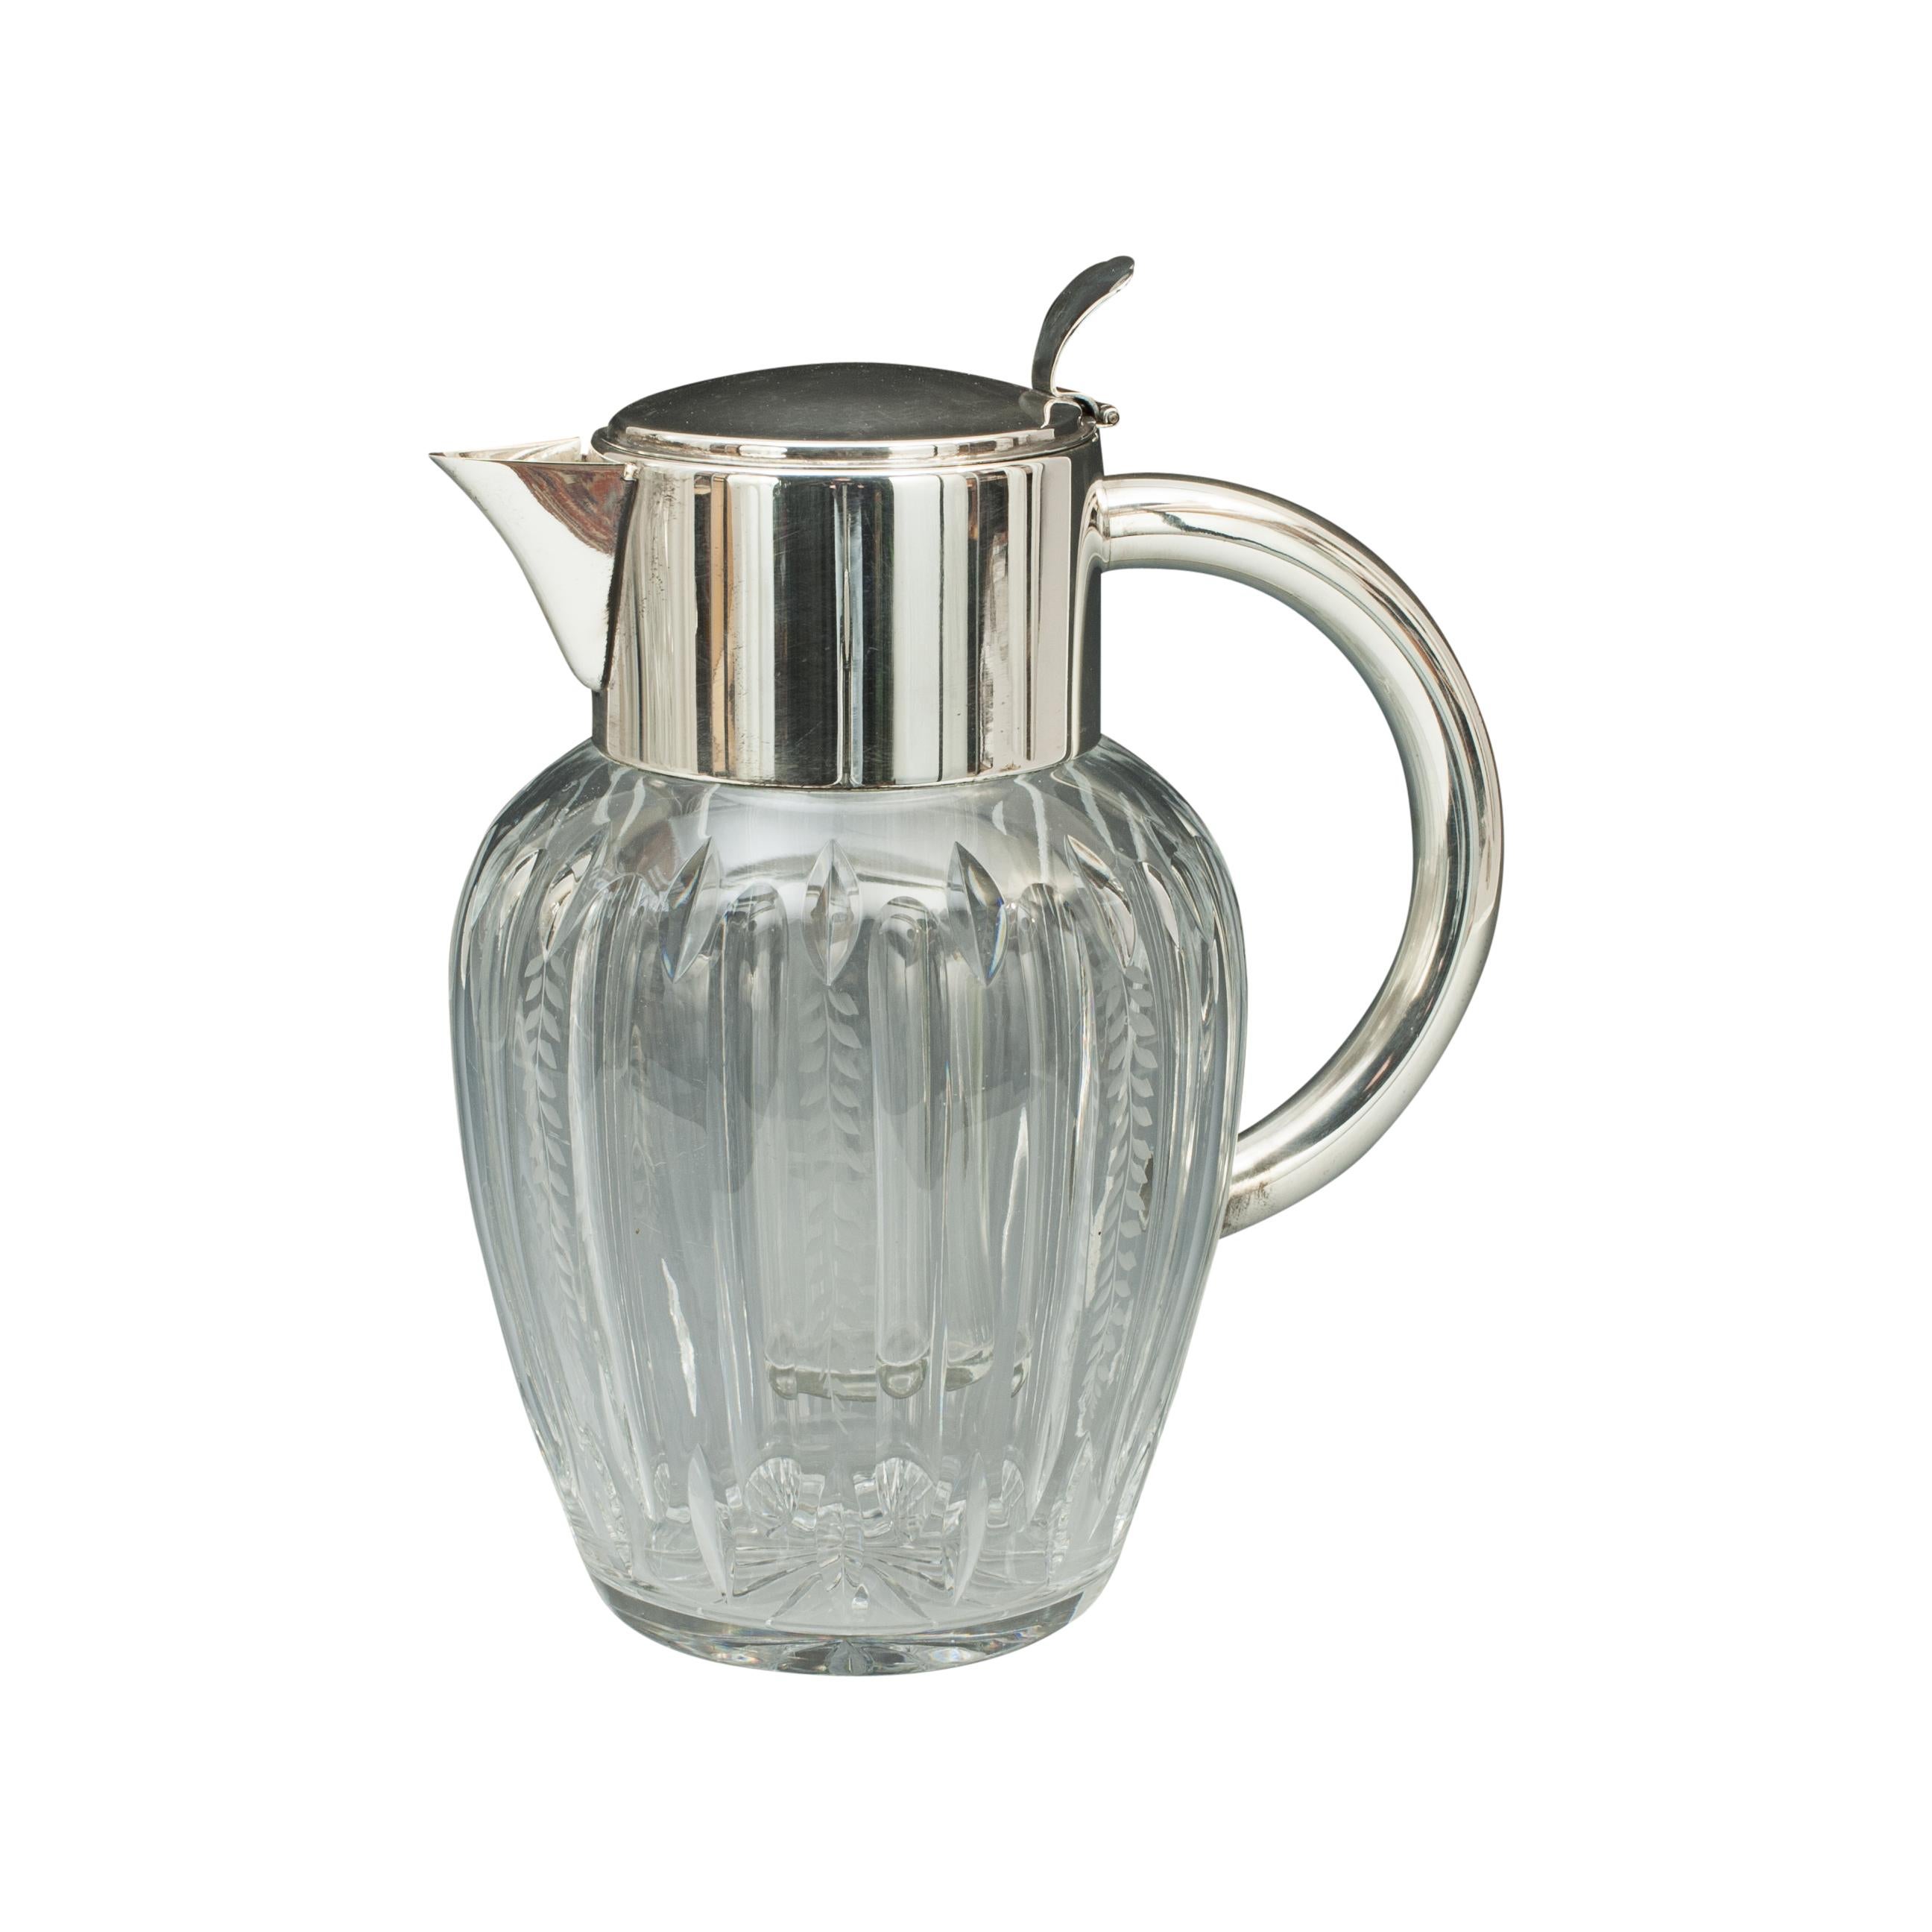 Vintage glass lemonade jug with cooler.
A very nice large lemonade jug with original internal cooling insert, this is the ideal way to keep your beverages chilled. The glass insert is filled with ice and put in place thus cooling the liquid inside,